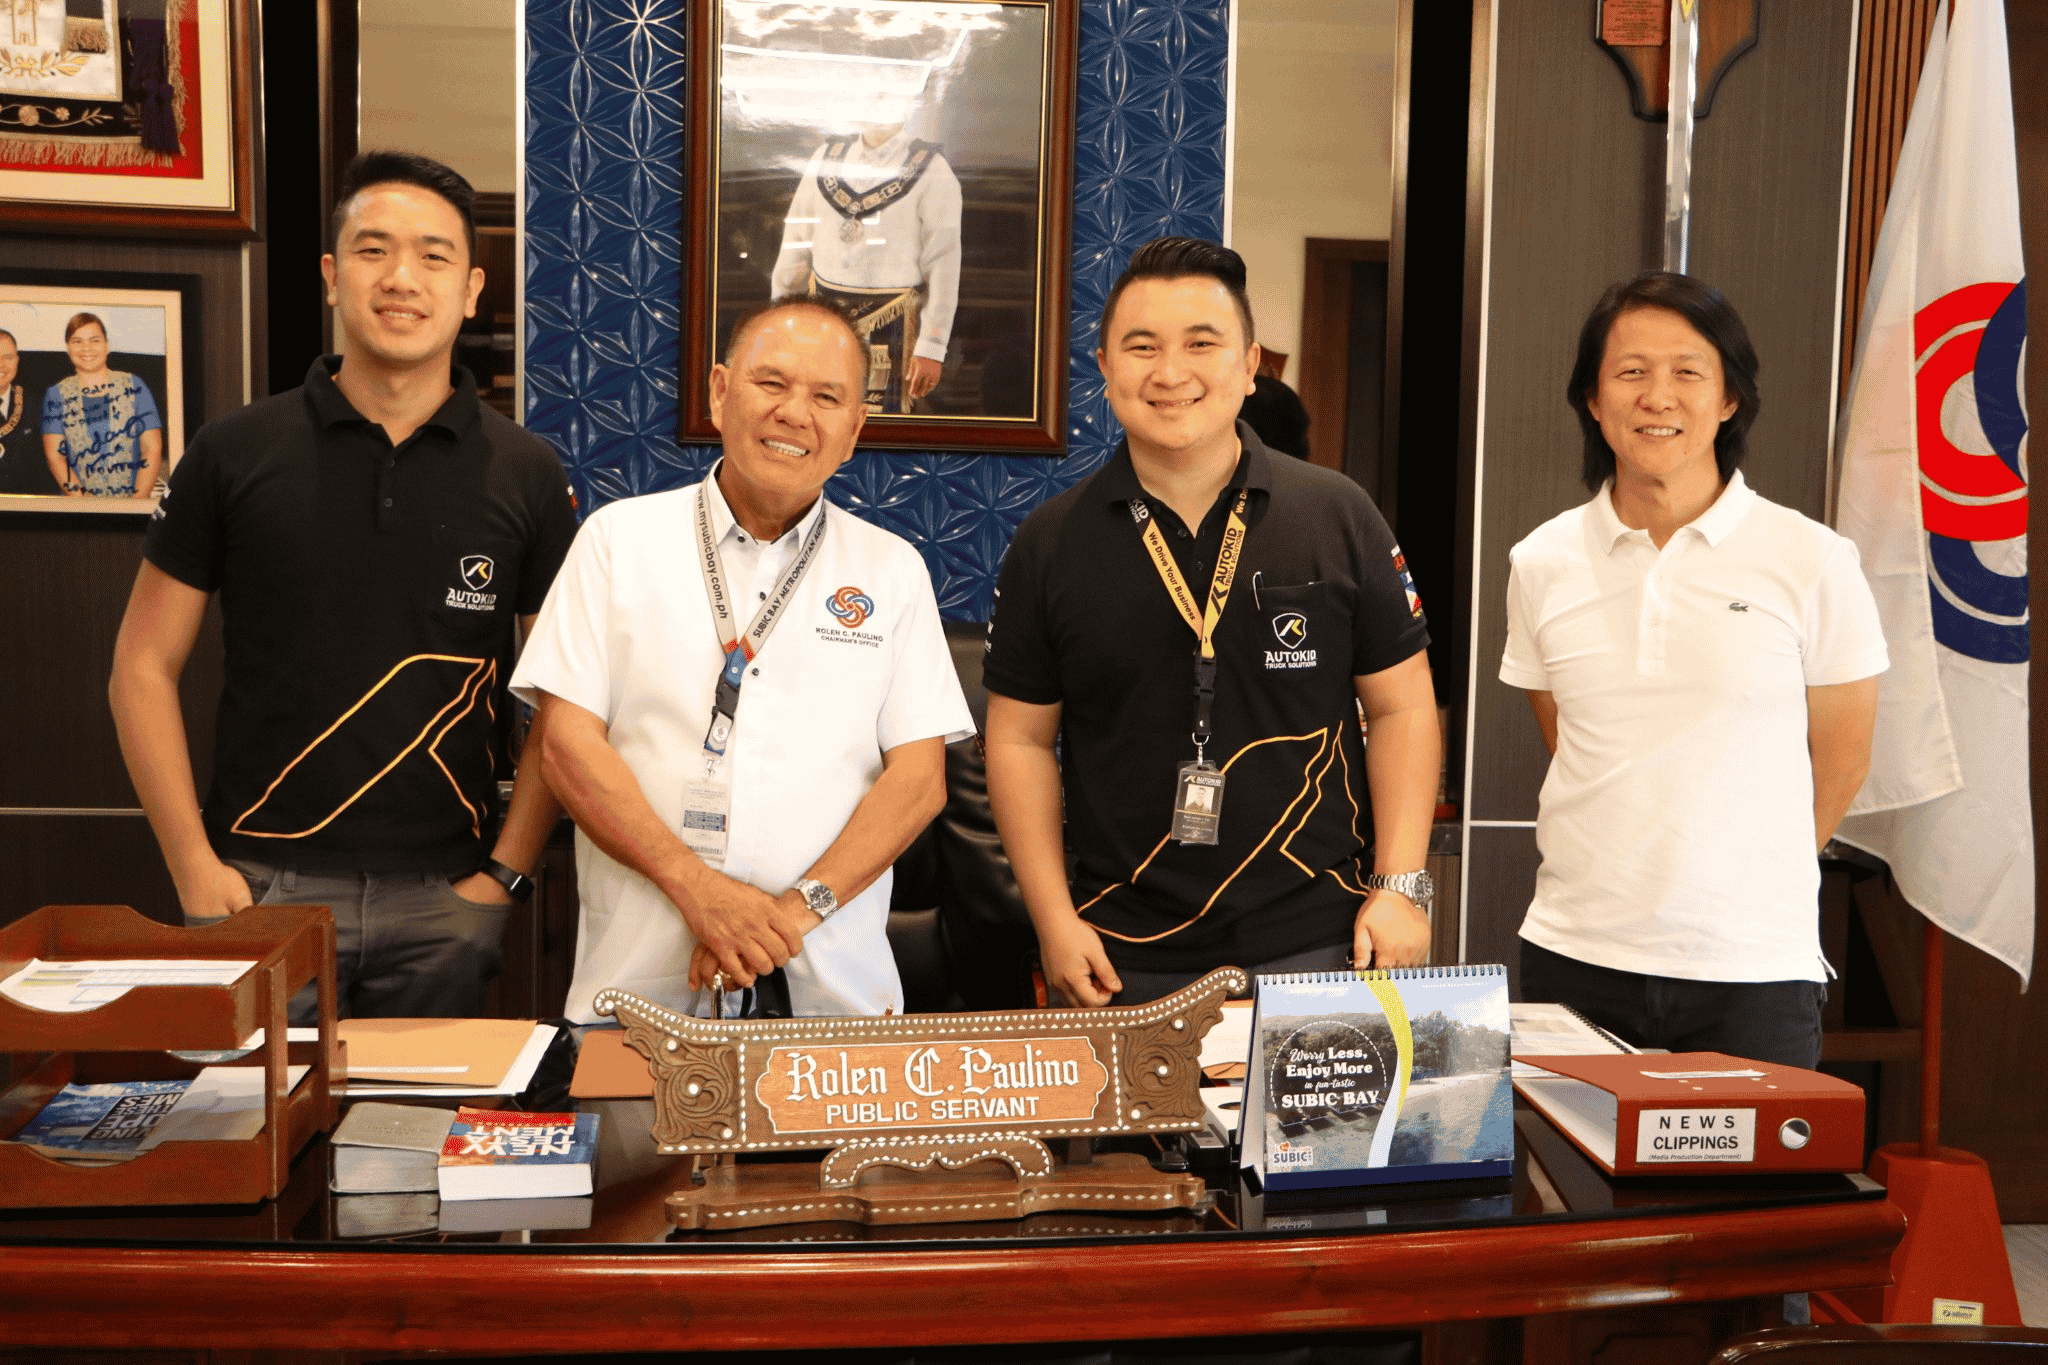 Autokid leaders CEO Kevin Yao and EVP Eric Lim meet SBMA Chairman Rolen Paulino in a courtesy visit to the latter's office yesterday.